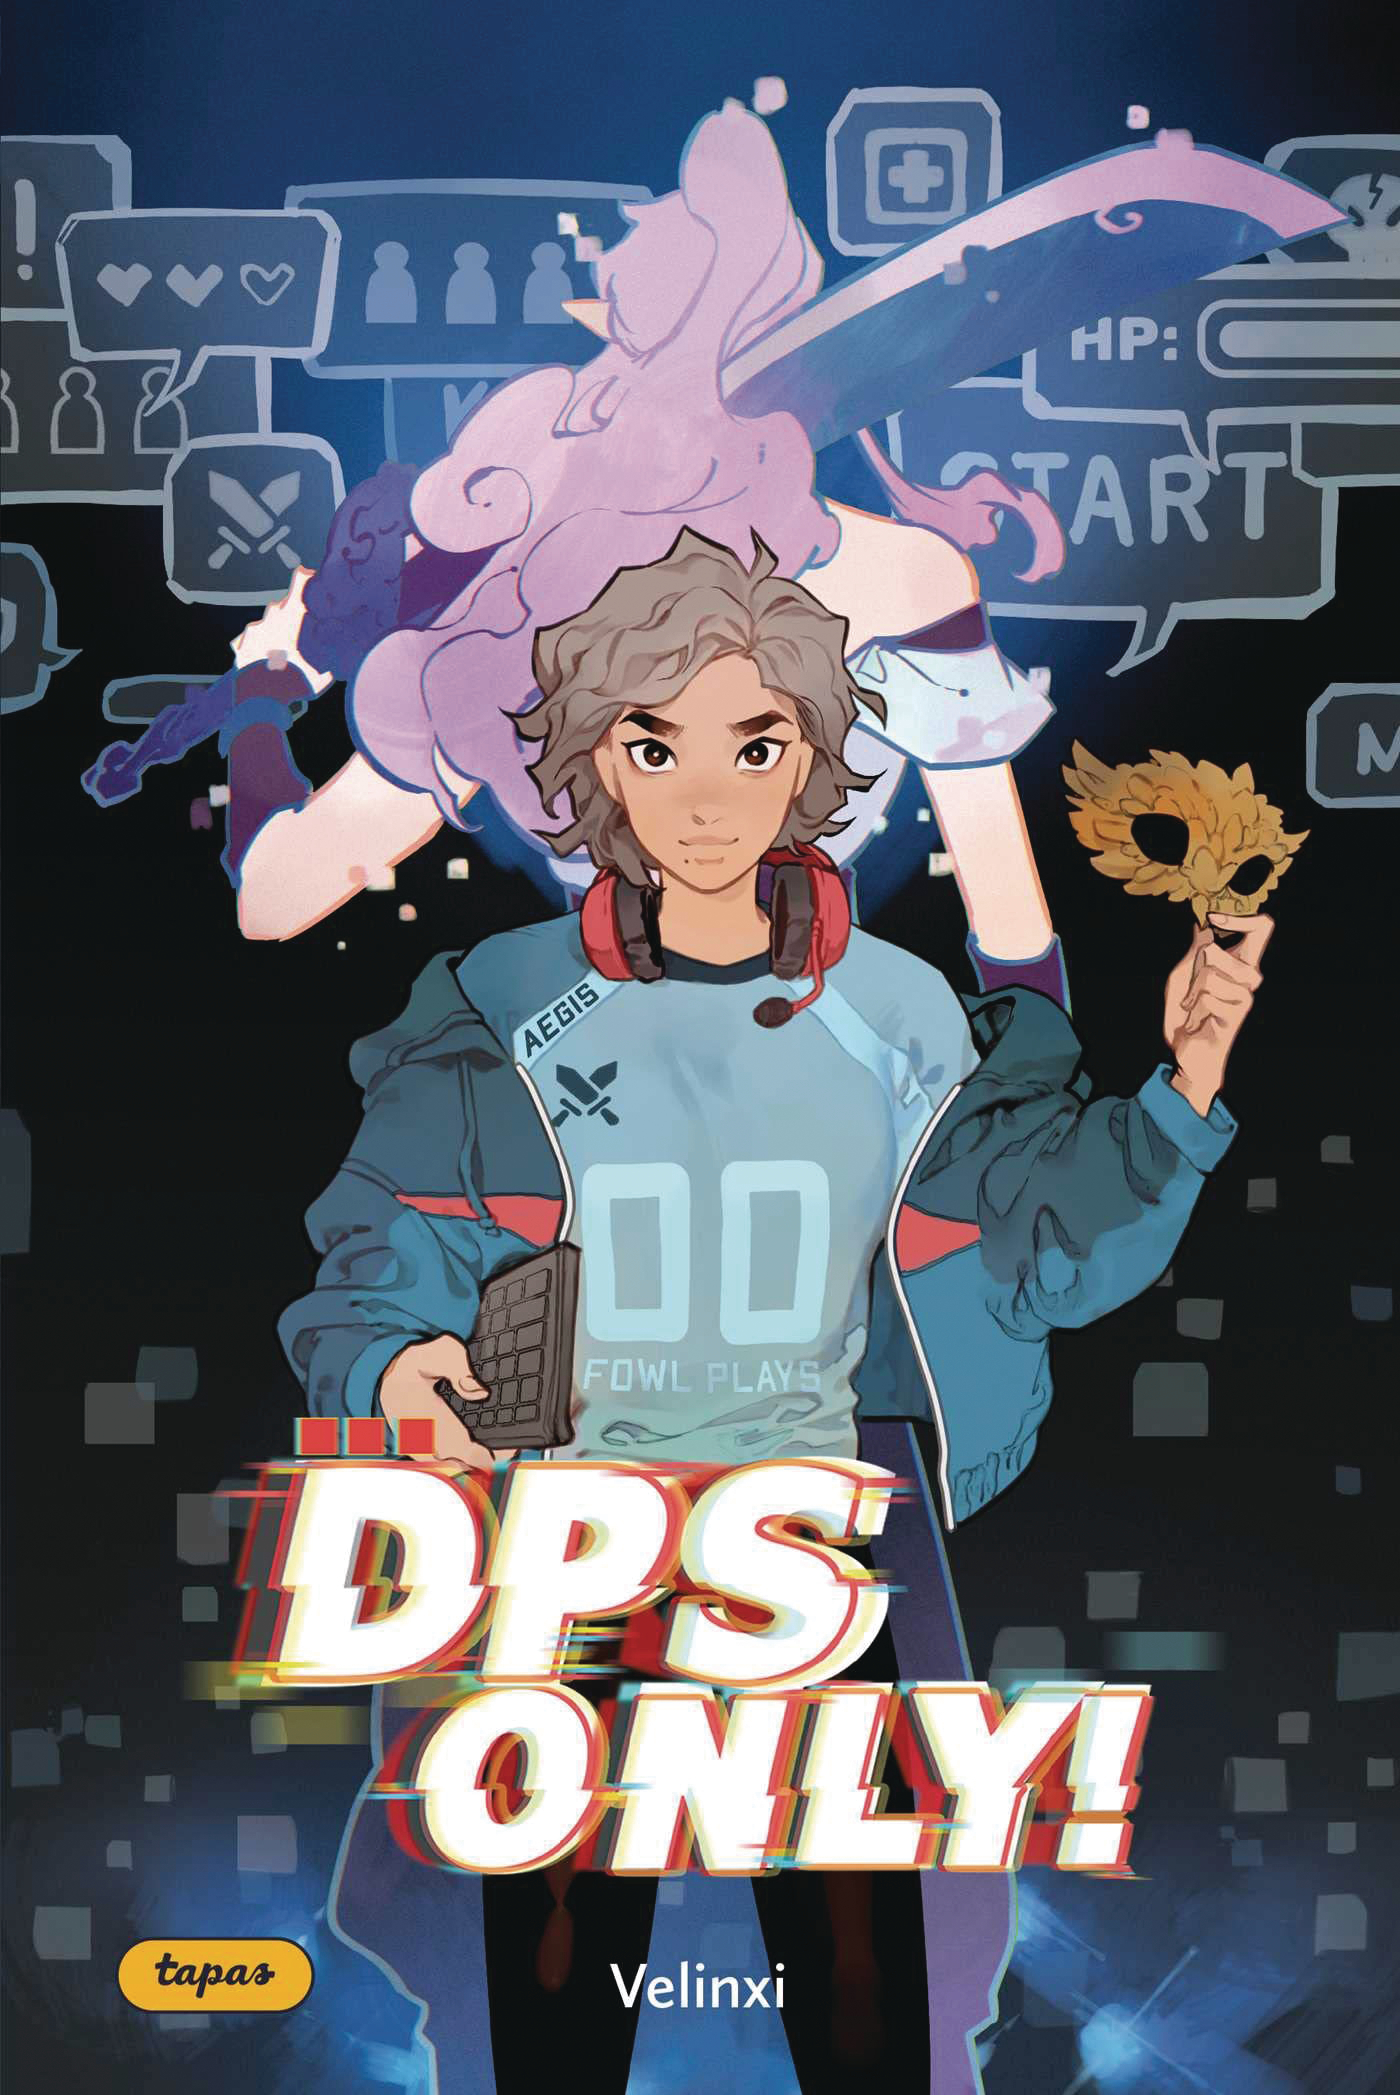 Dps Only Graphic Novel